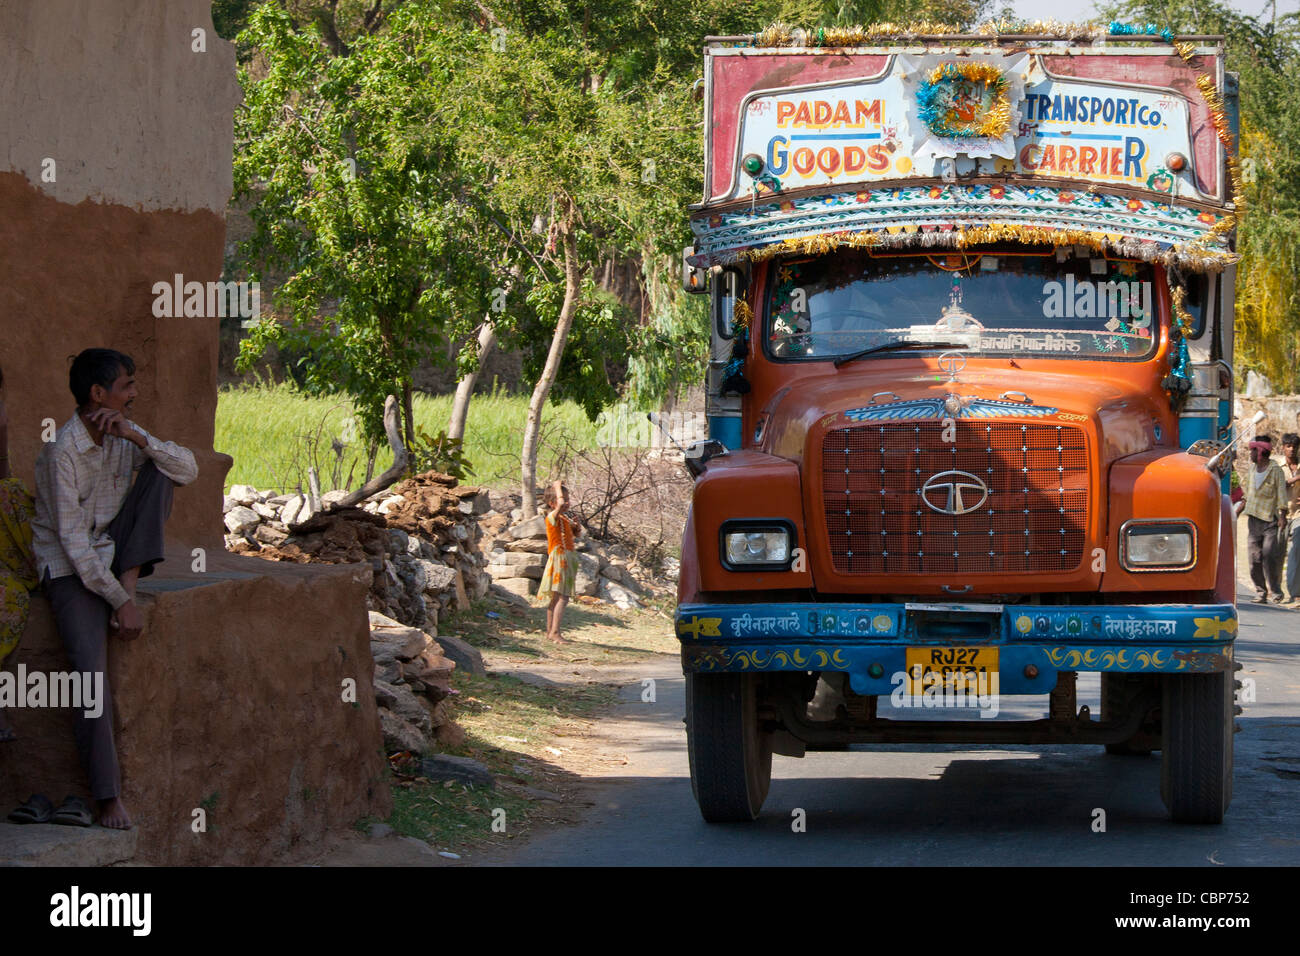 Tata truck, Padam Transport Co. goods carrier, passes through Tarpal in Pali District of Rajasthan, Western India Stock Photo